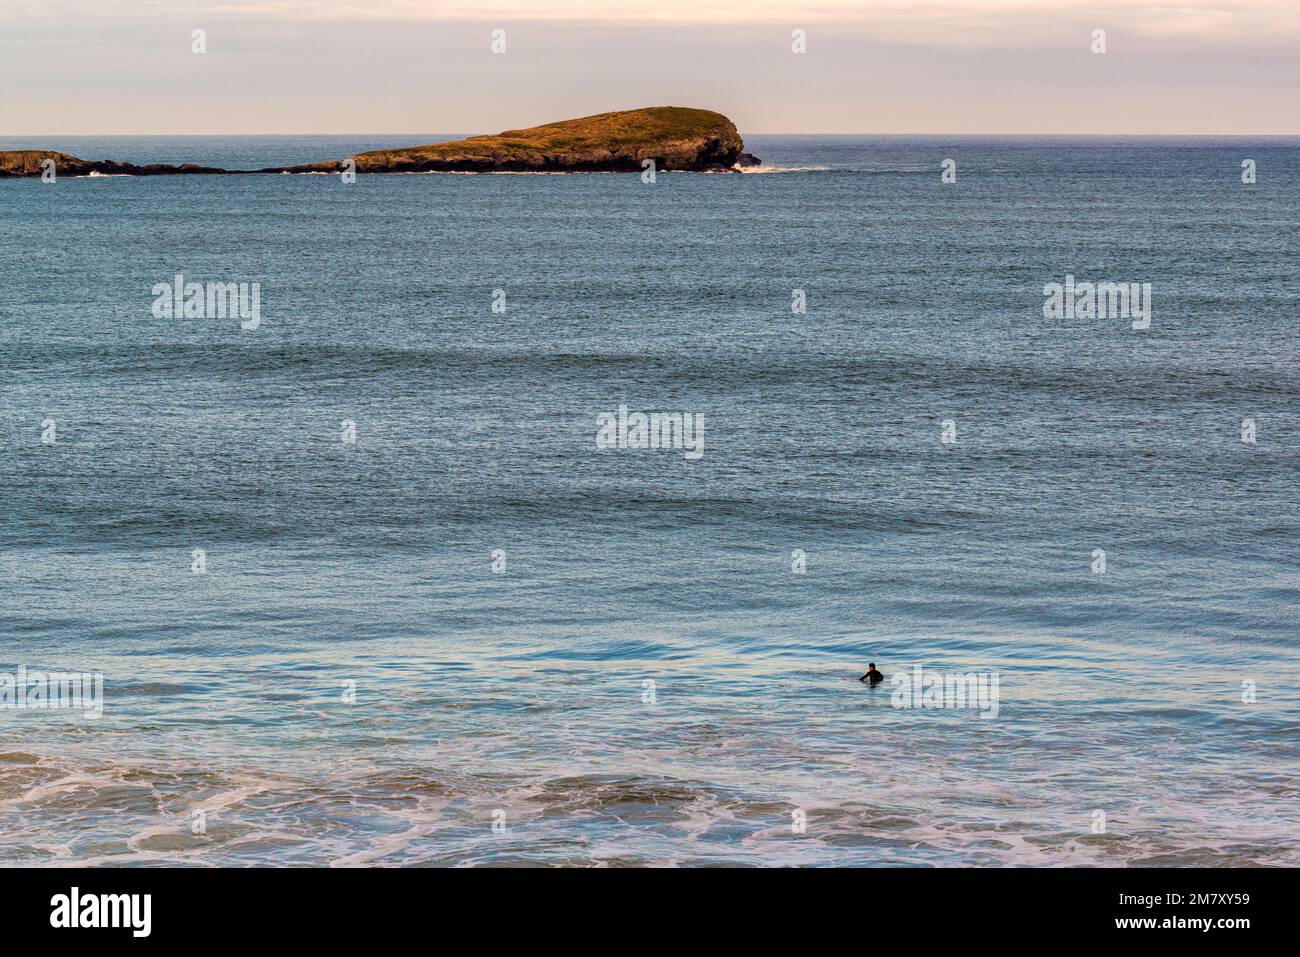 Sulfist on a surfboard in the crest of a wave in the Cantabrian Sea, Islares, Cantabria, northern Spain, Europe Stock Photo